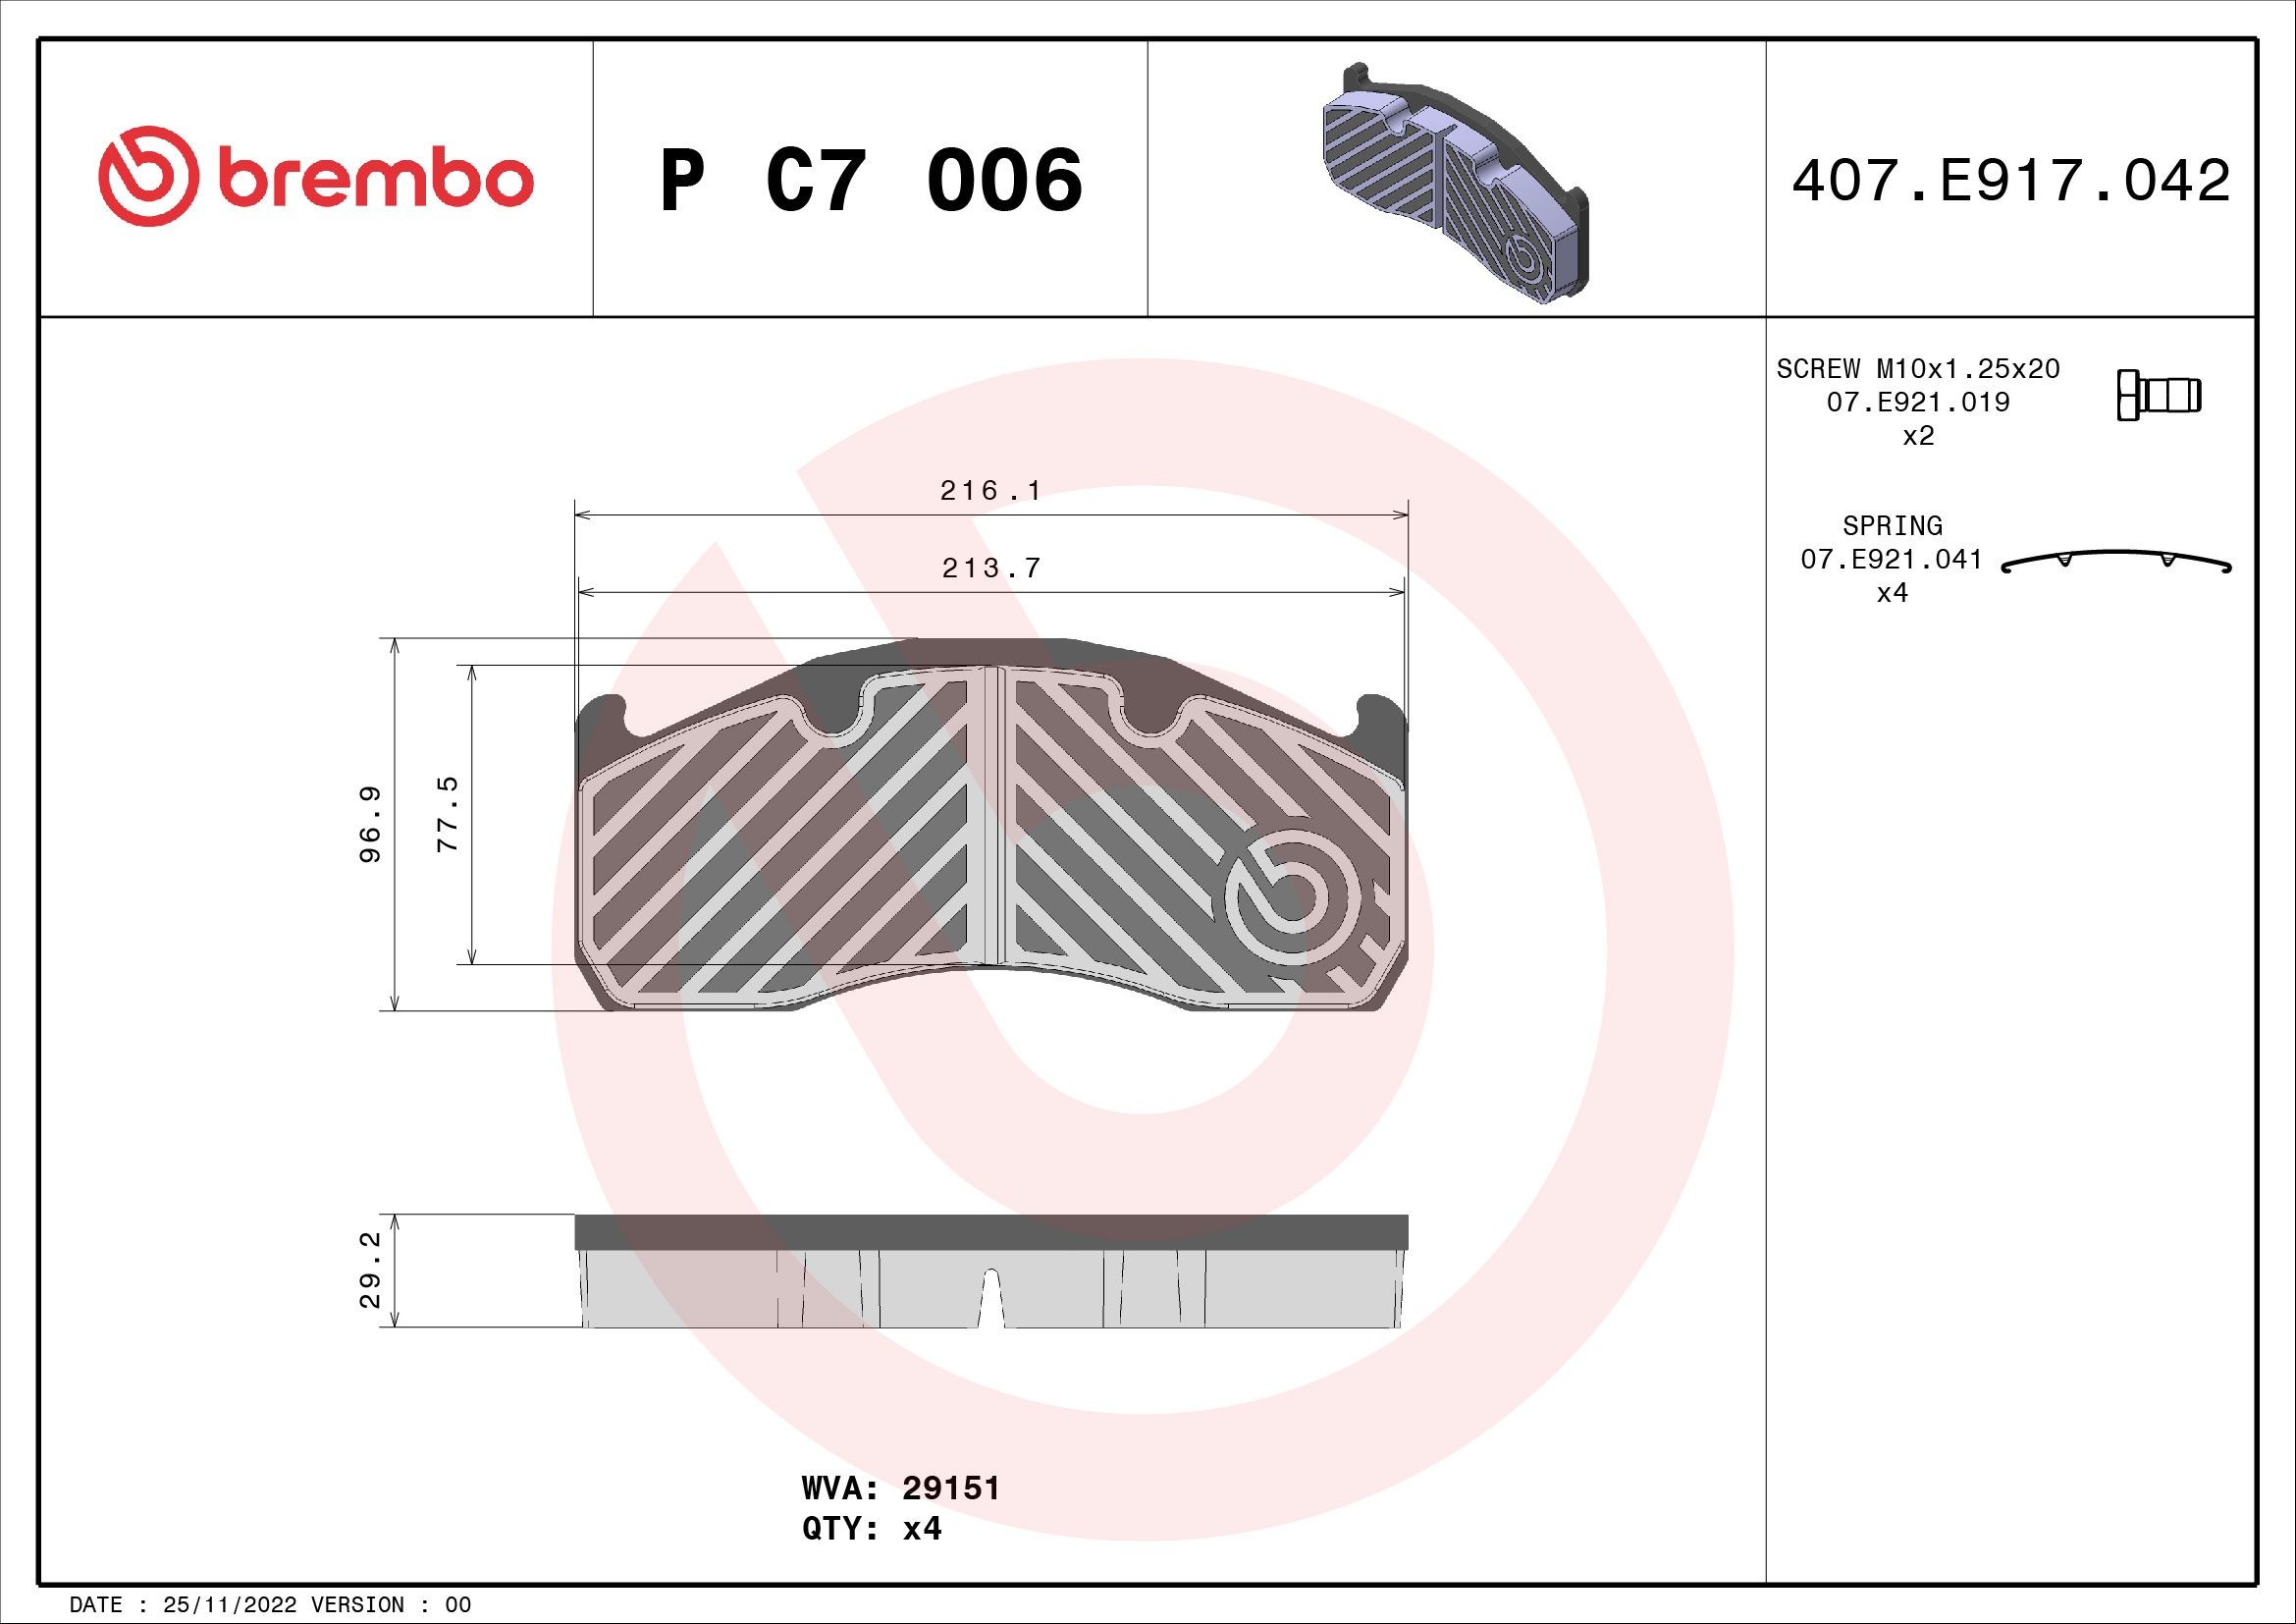 BREMBO P C7 006 Brake pad set excl. wear warning contact, with accessories